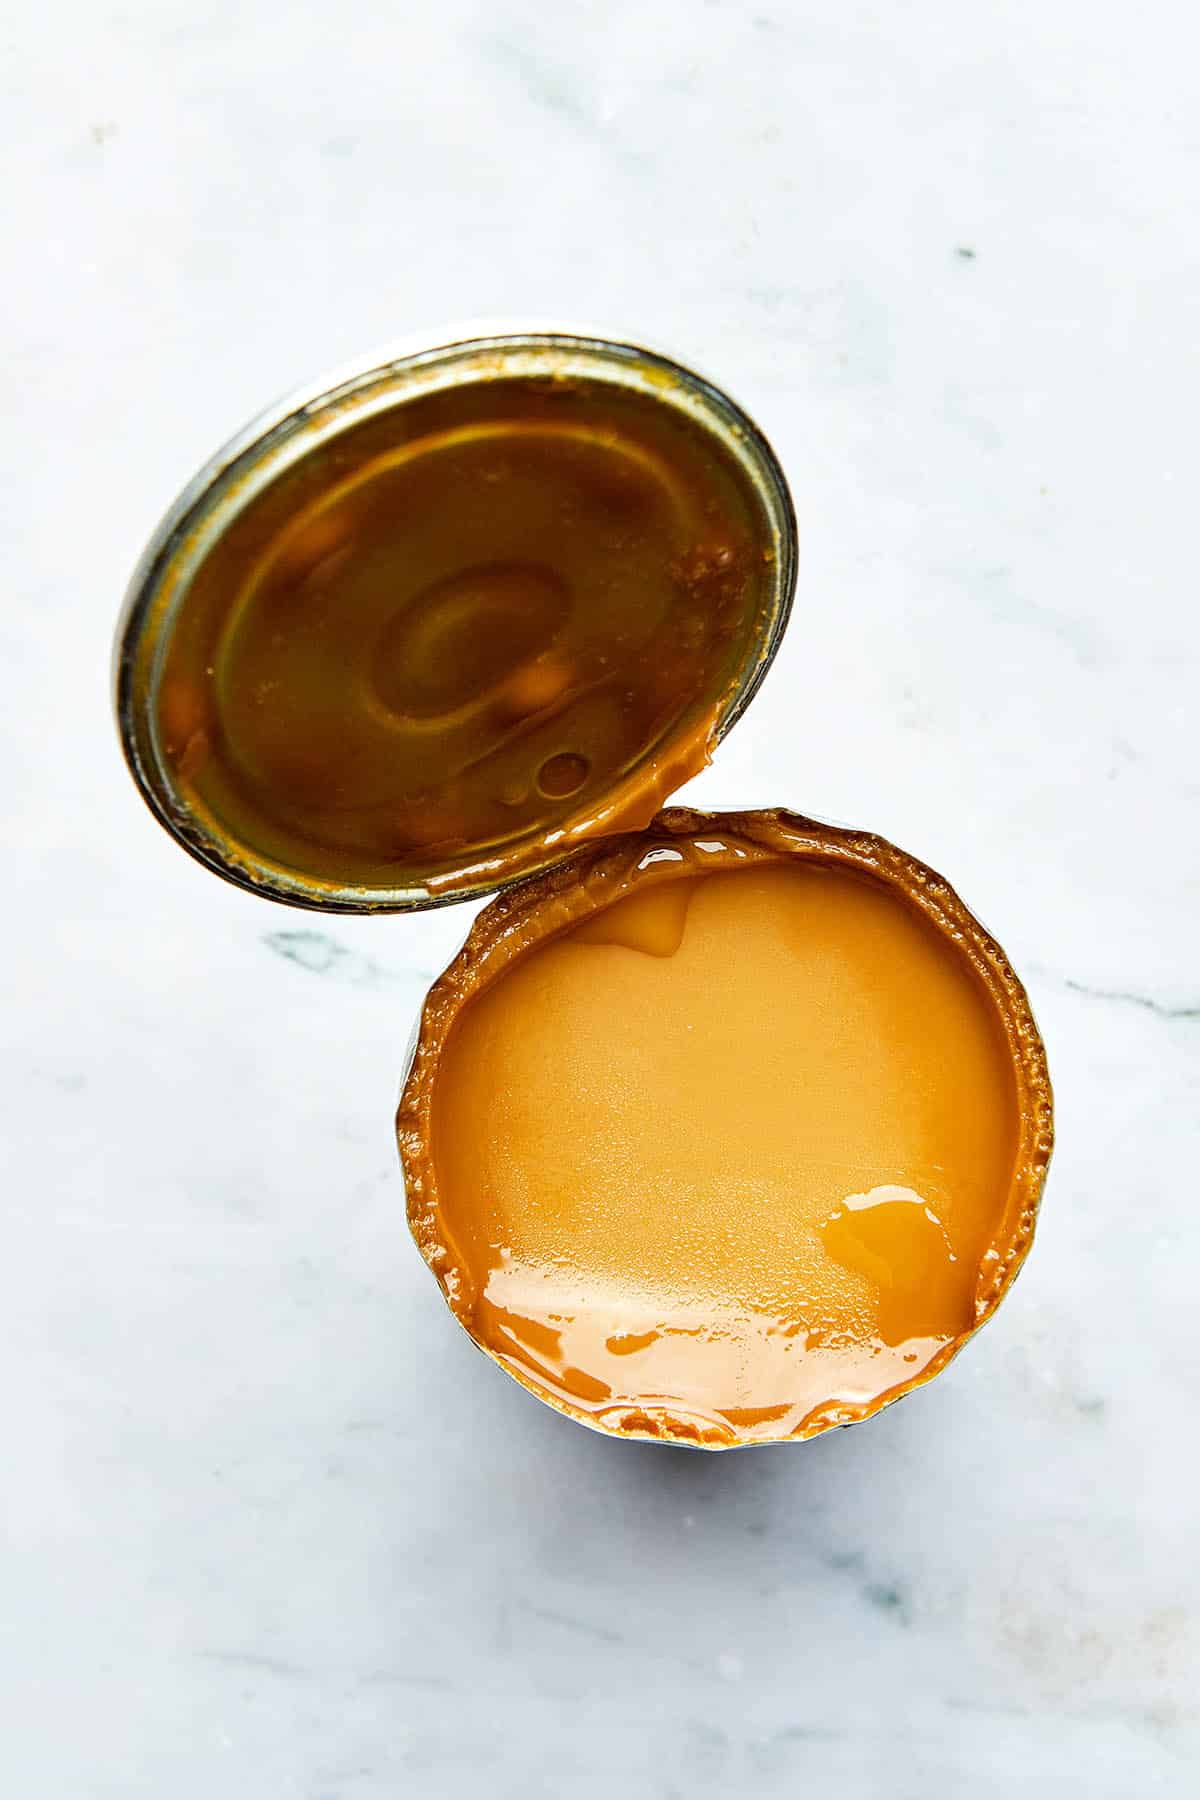 An opened can of Instant Pot dulce de leche with the lid still attached.